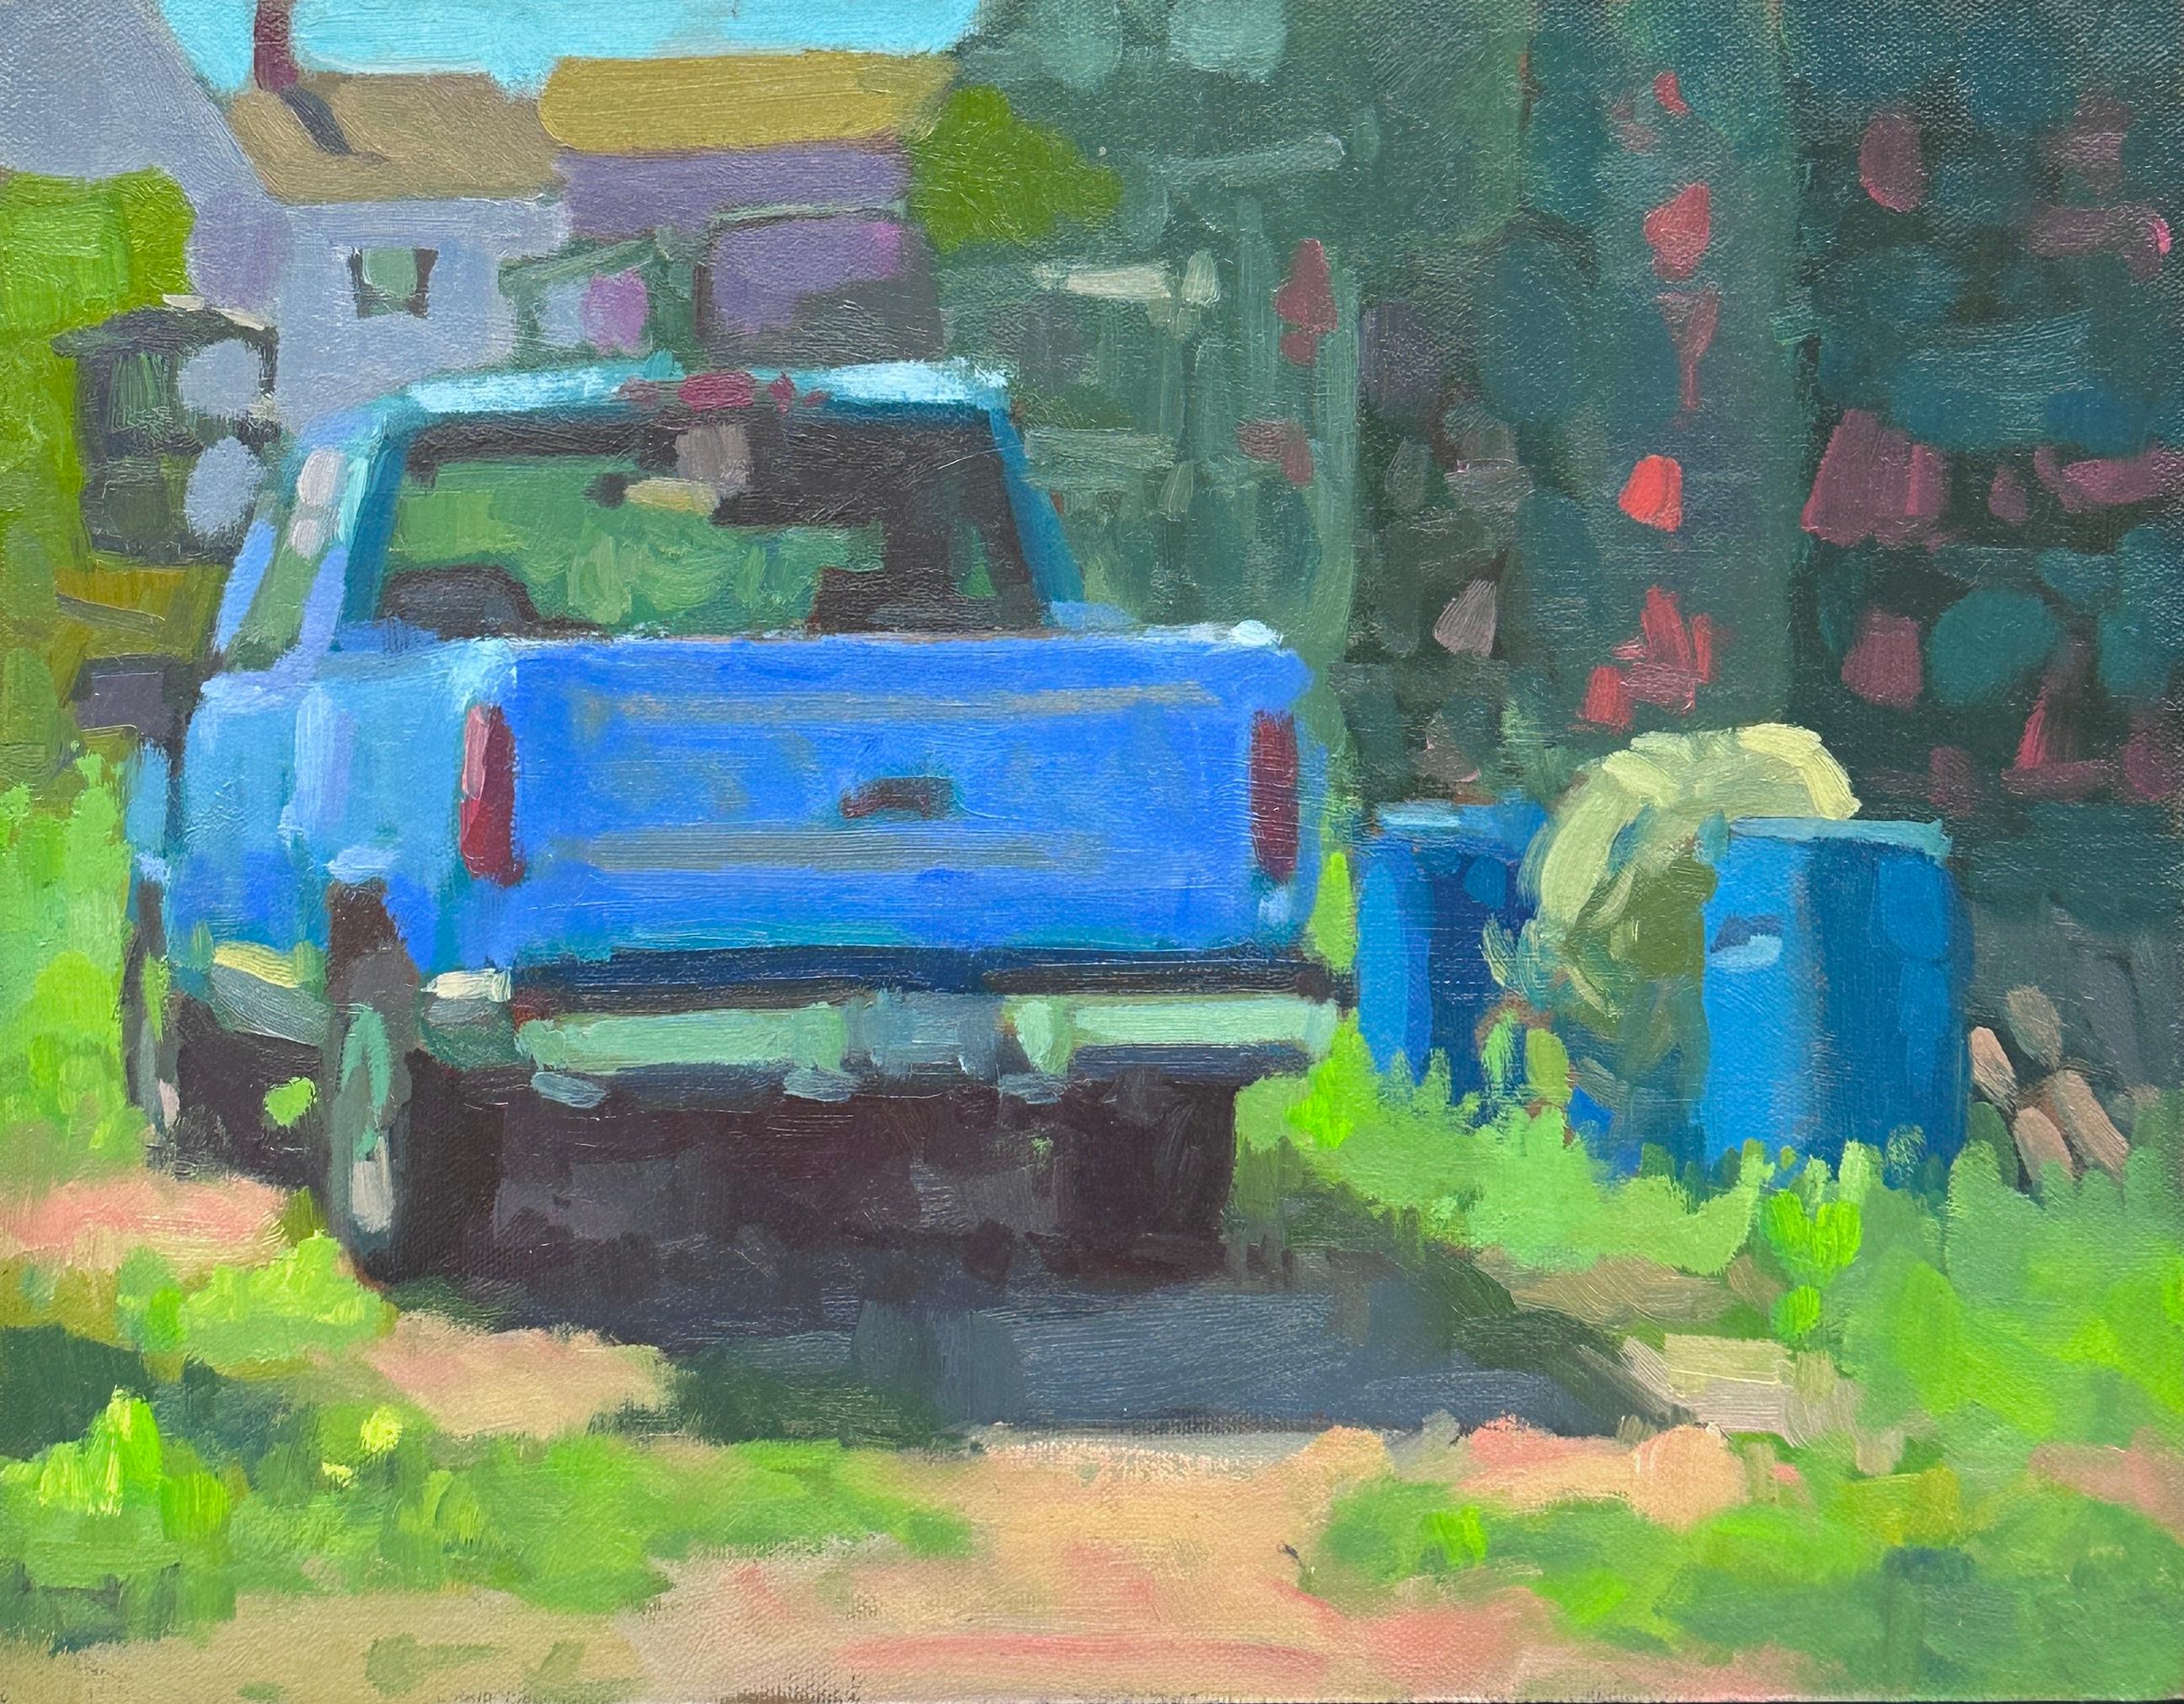 Daniel Corey Landscape Painting - Yard Truck, painting of pick-up truck on a sunny day - signed by artist on back